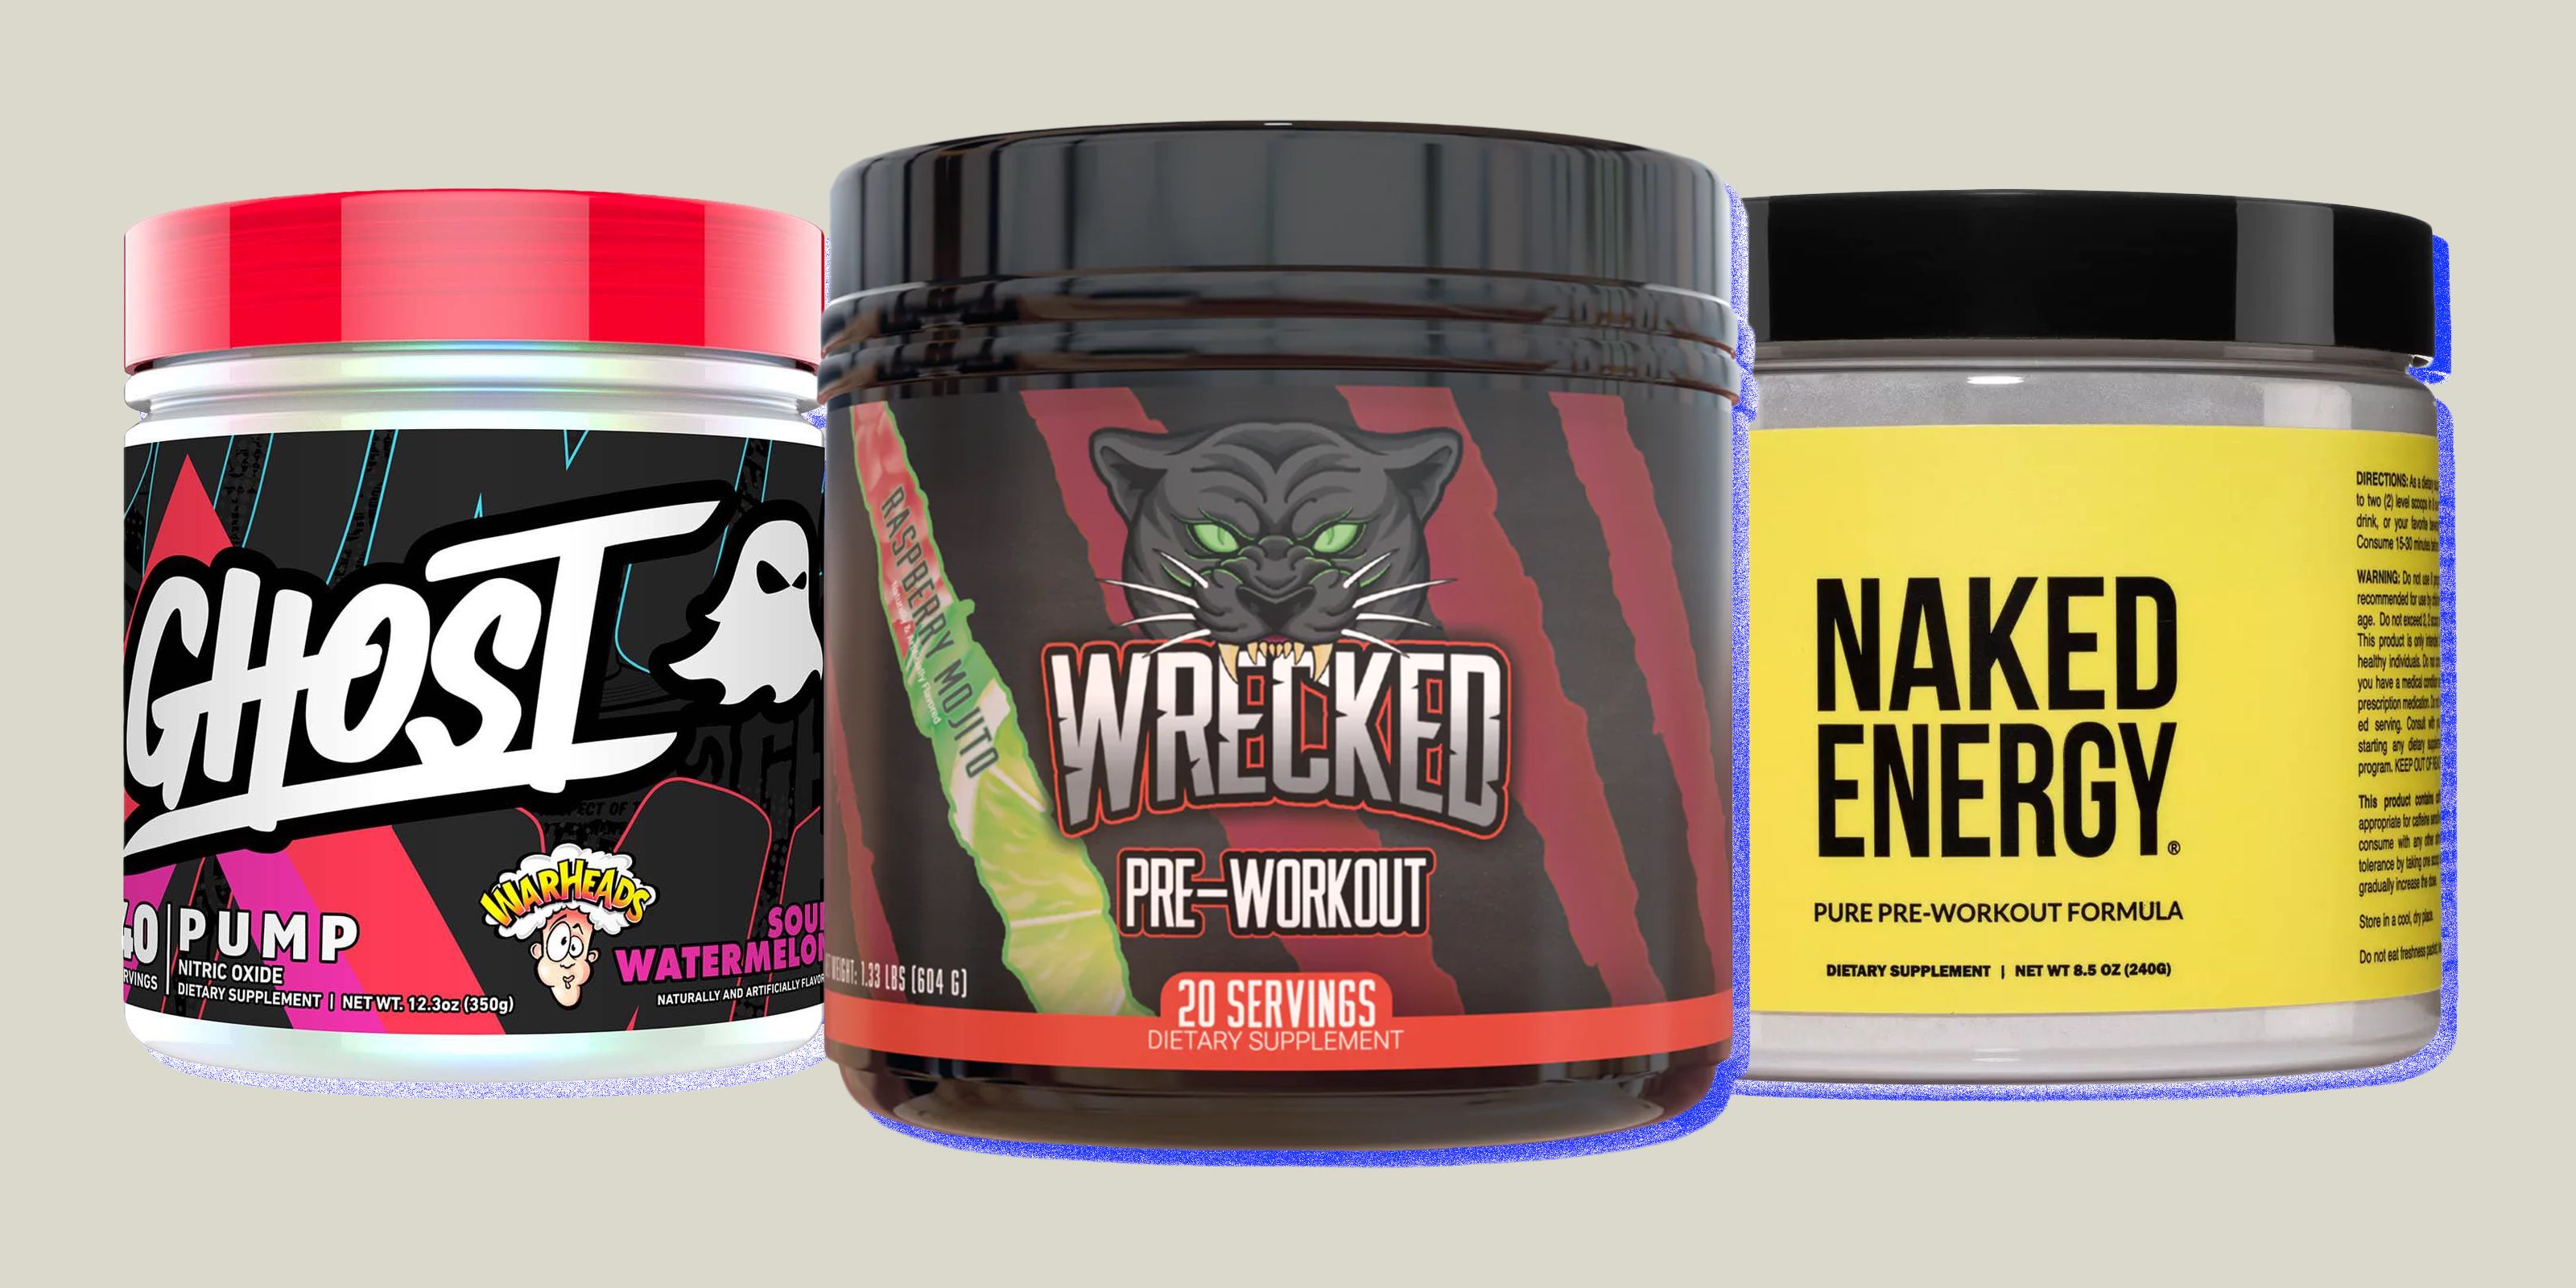 Is Pre-Workout Bad For You? Benefits vs Side Effects - Steel